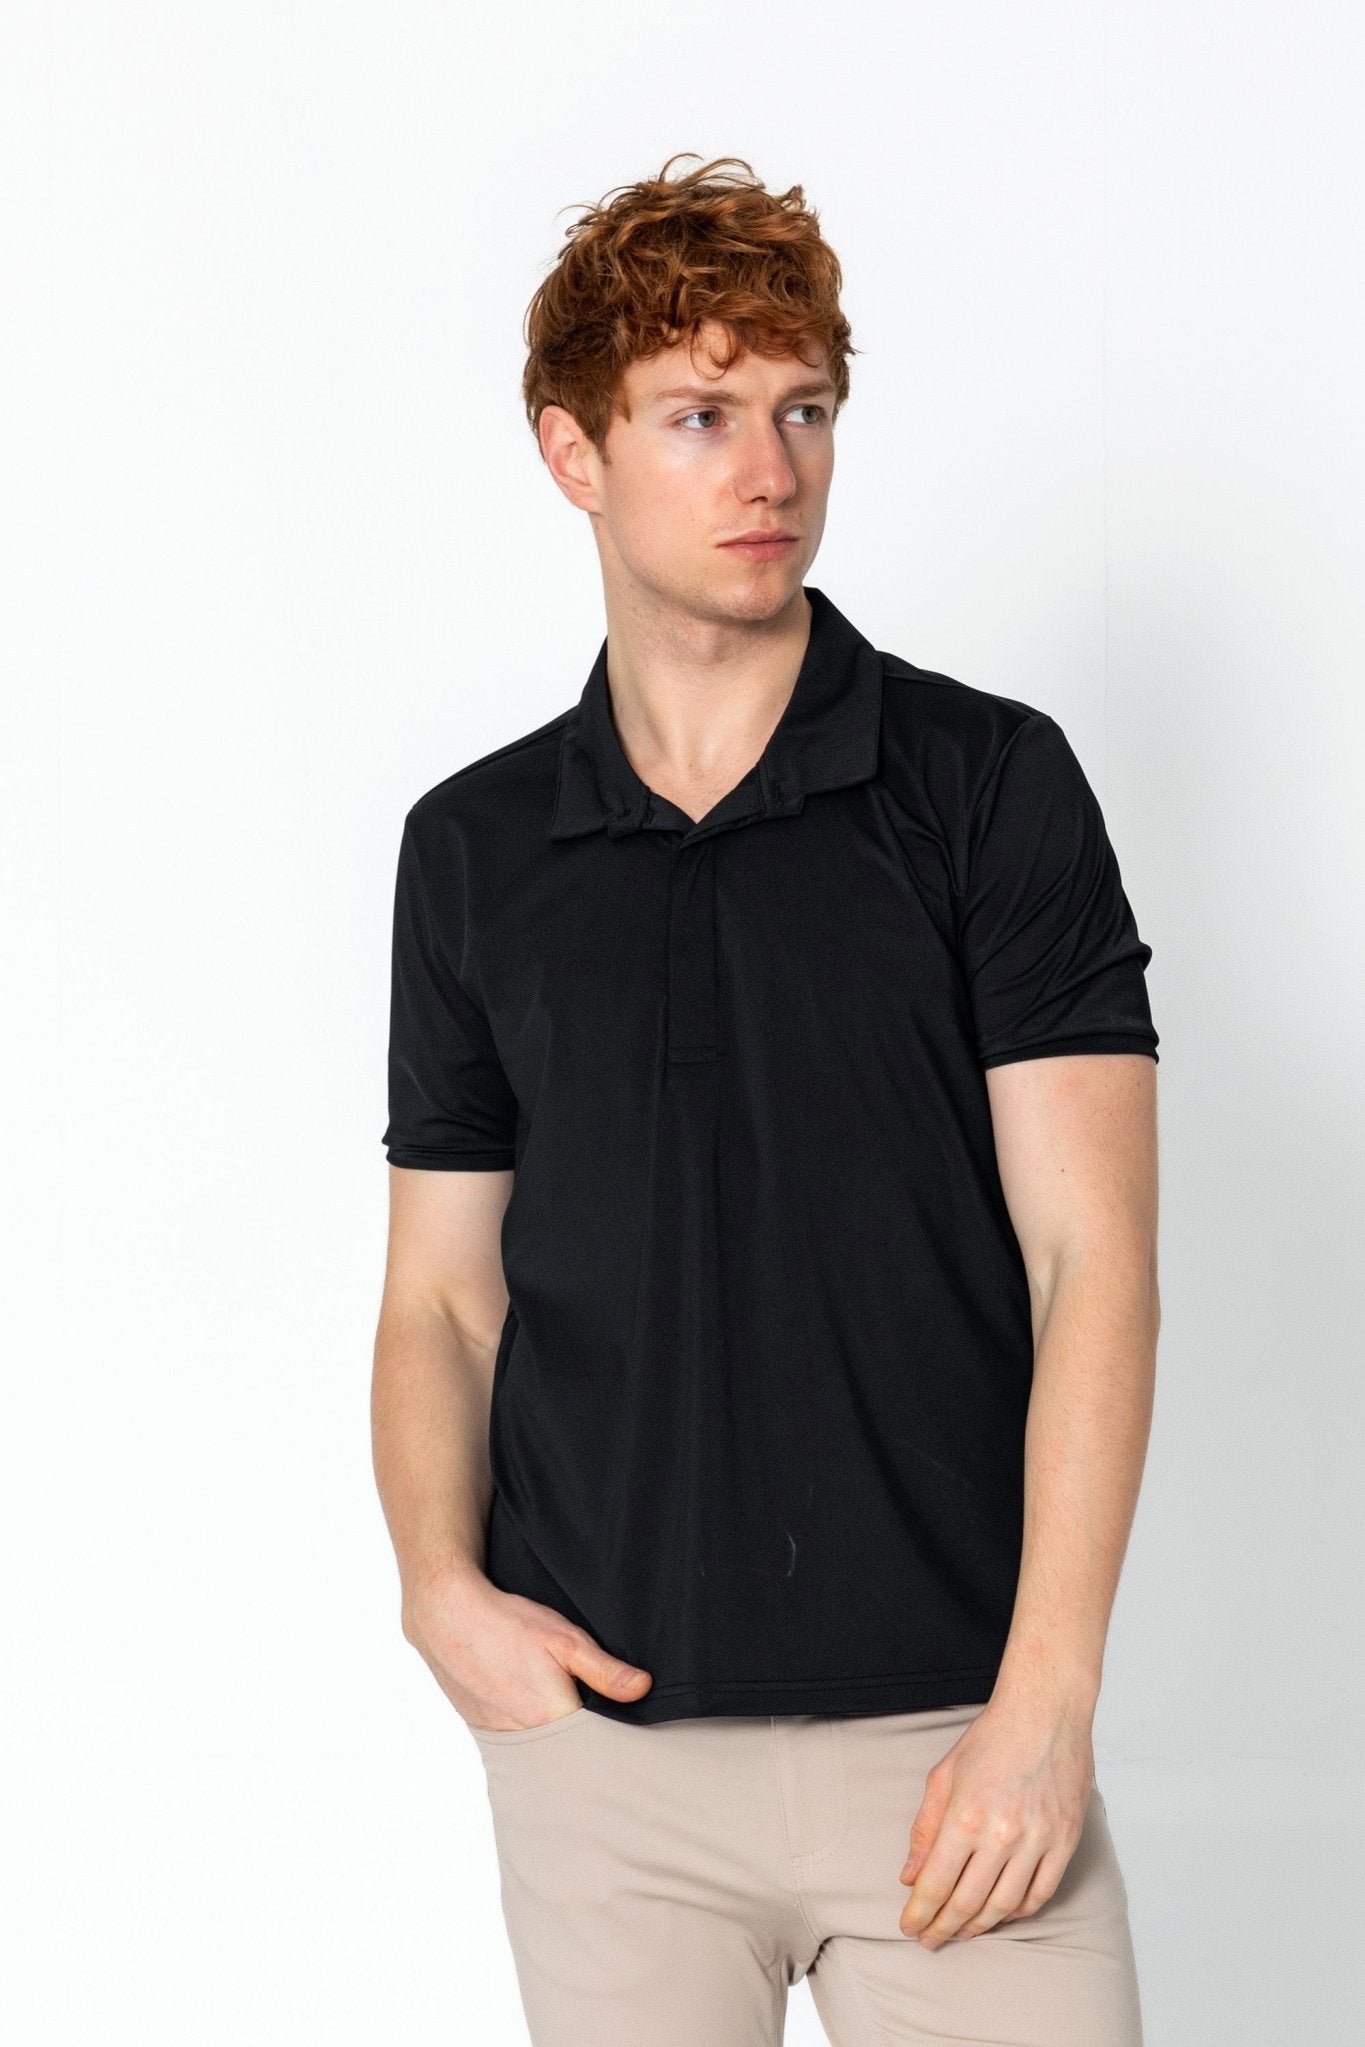 Wrinkle Free Tapered Travel Polo Shirts - Black - Ron Tomson